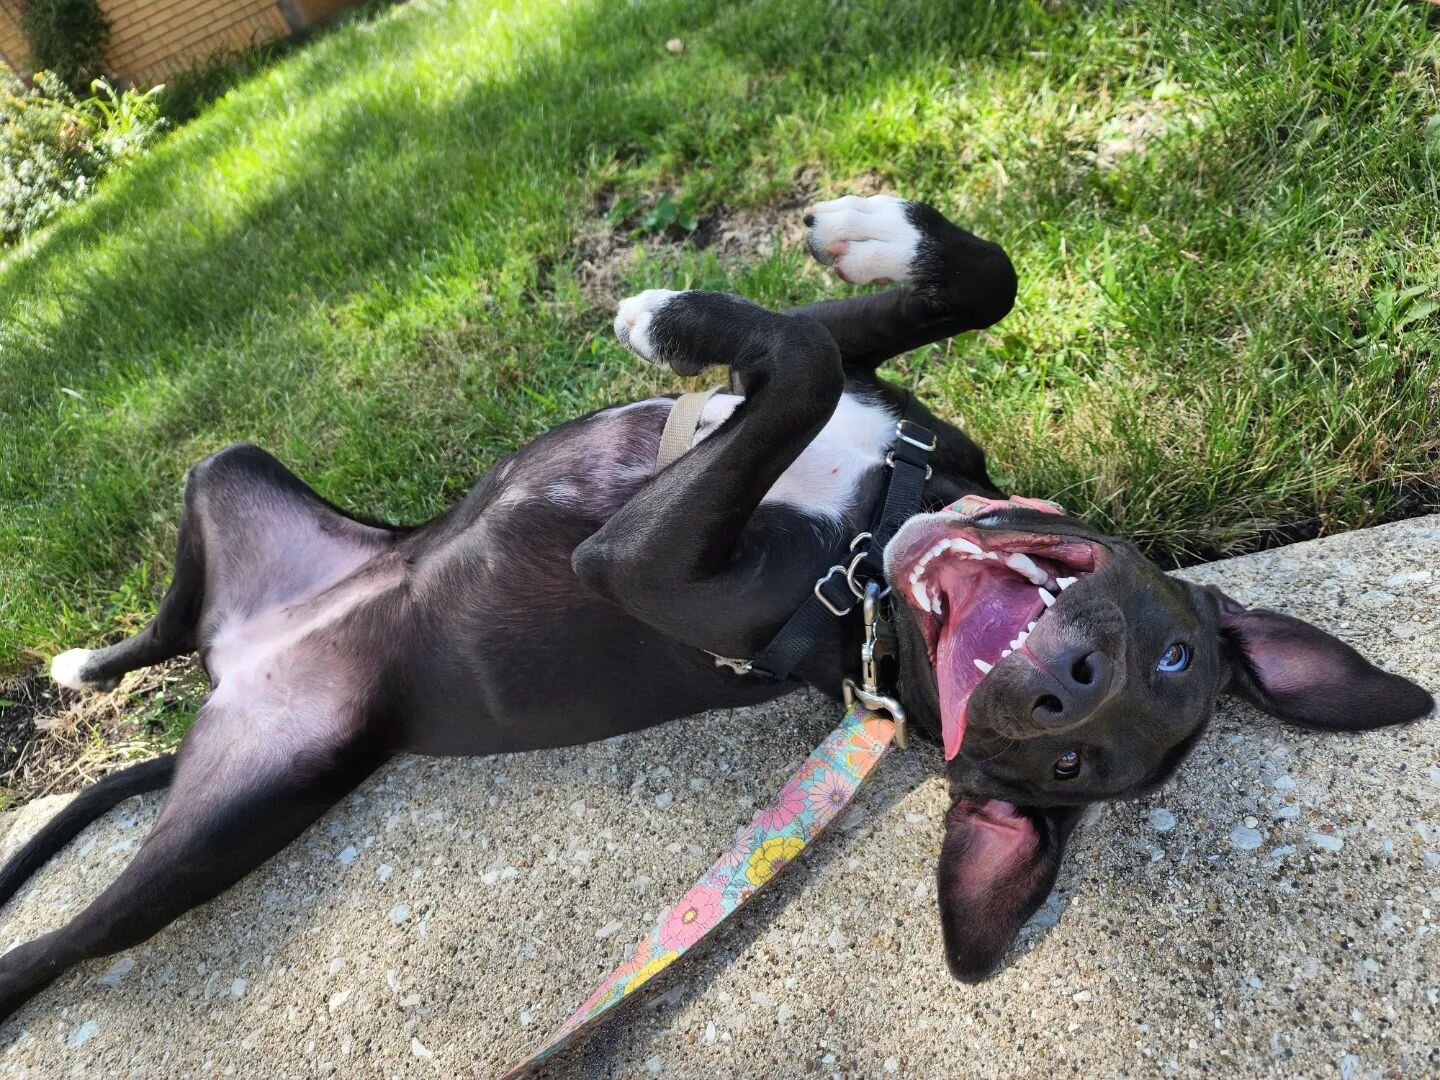 Callie is such a happy pup! She loves to play and go on walks and get belly rubs ^_^
#HaymarketHounds #HHCallie #dogwalker #dogwalking #chicagodogwalker